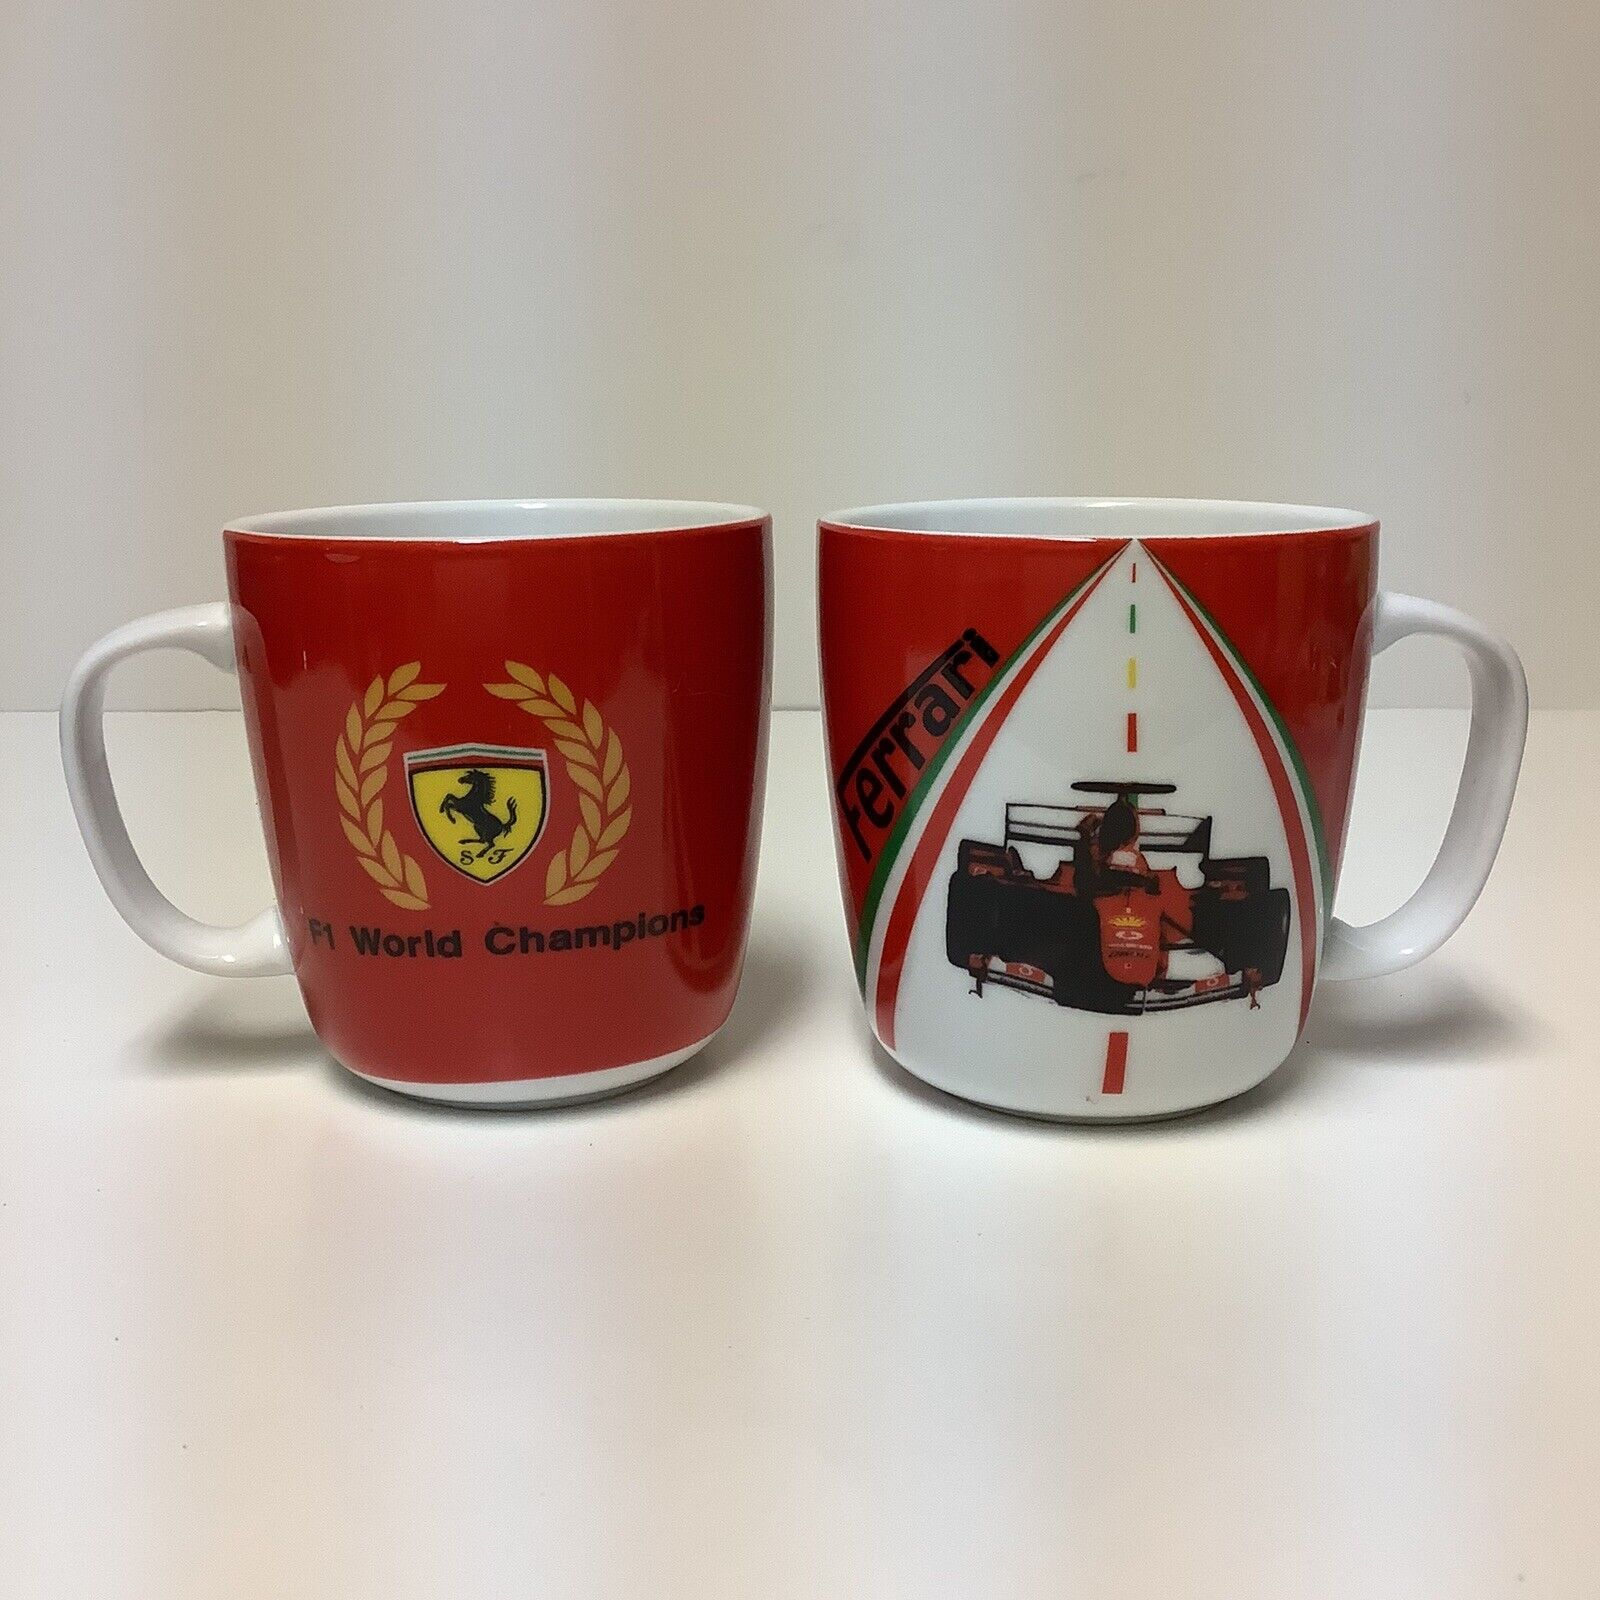 Ferrari F1 World Champions Red Coffee Mugs Set of 2 Official Licensed Product